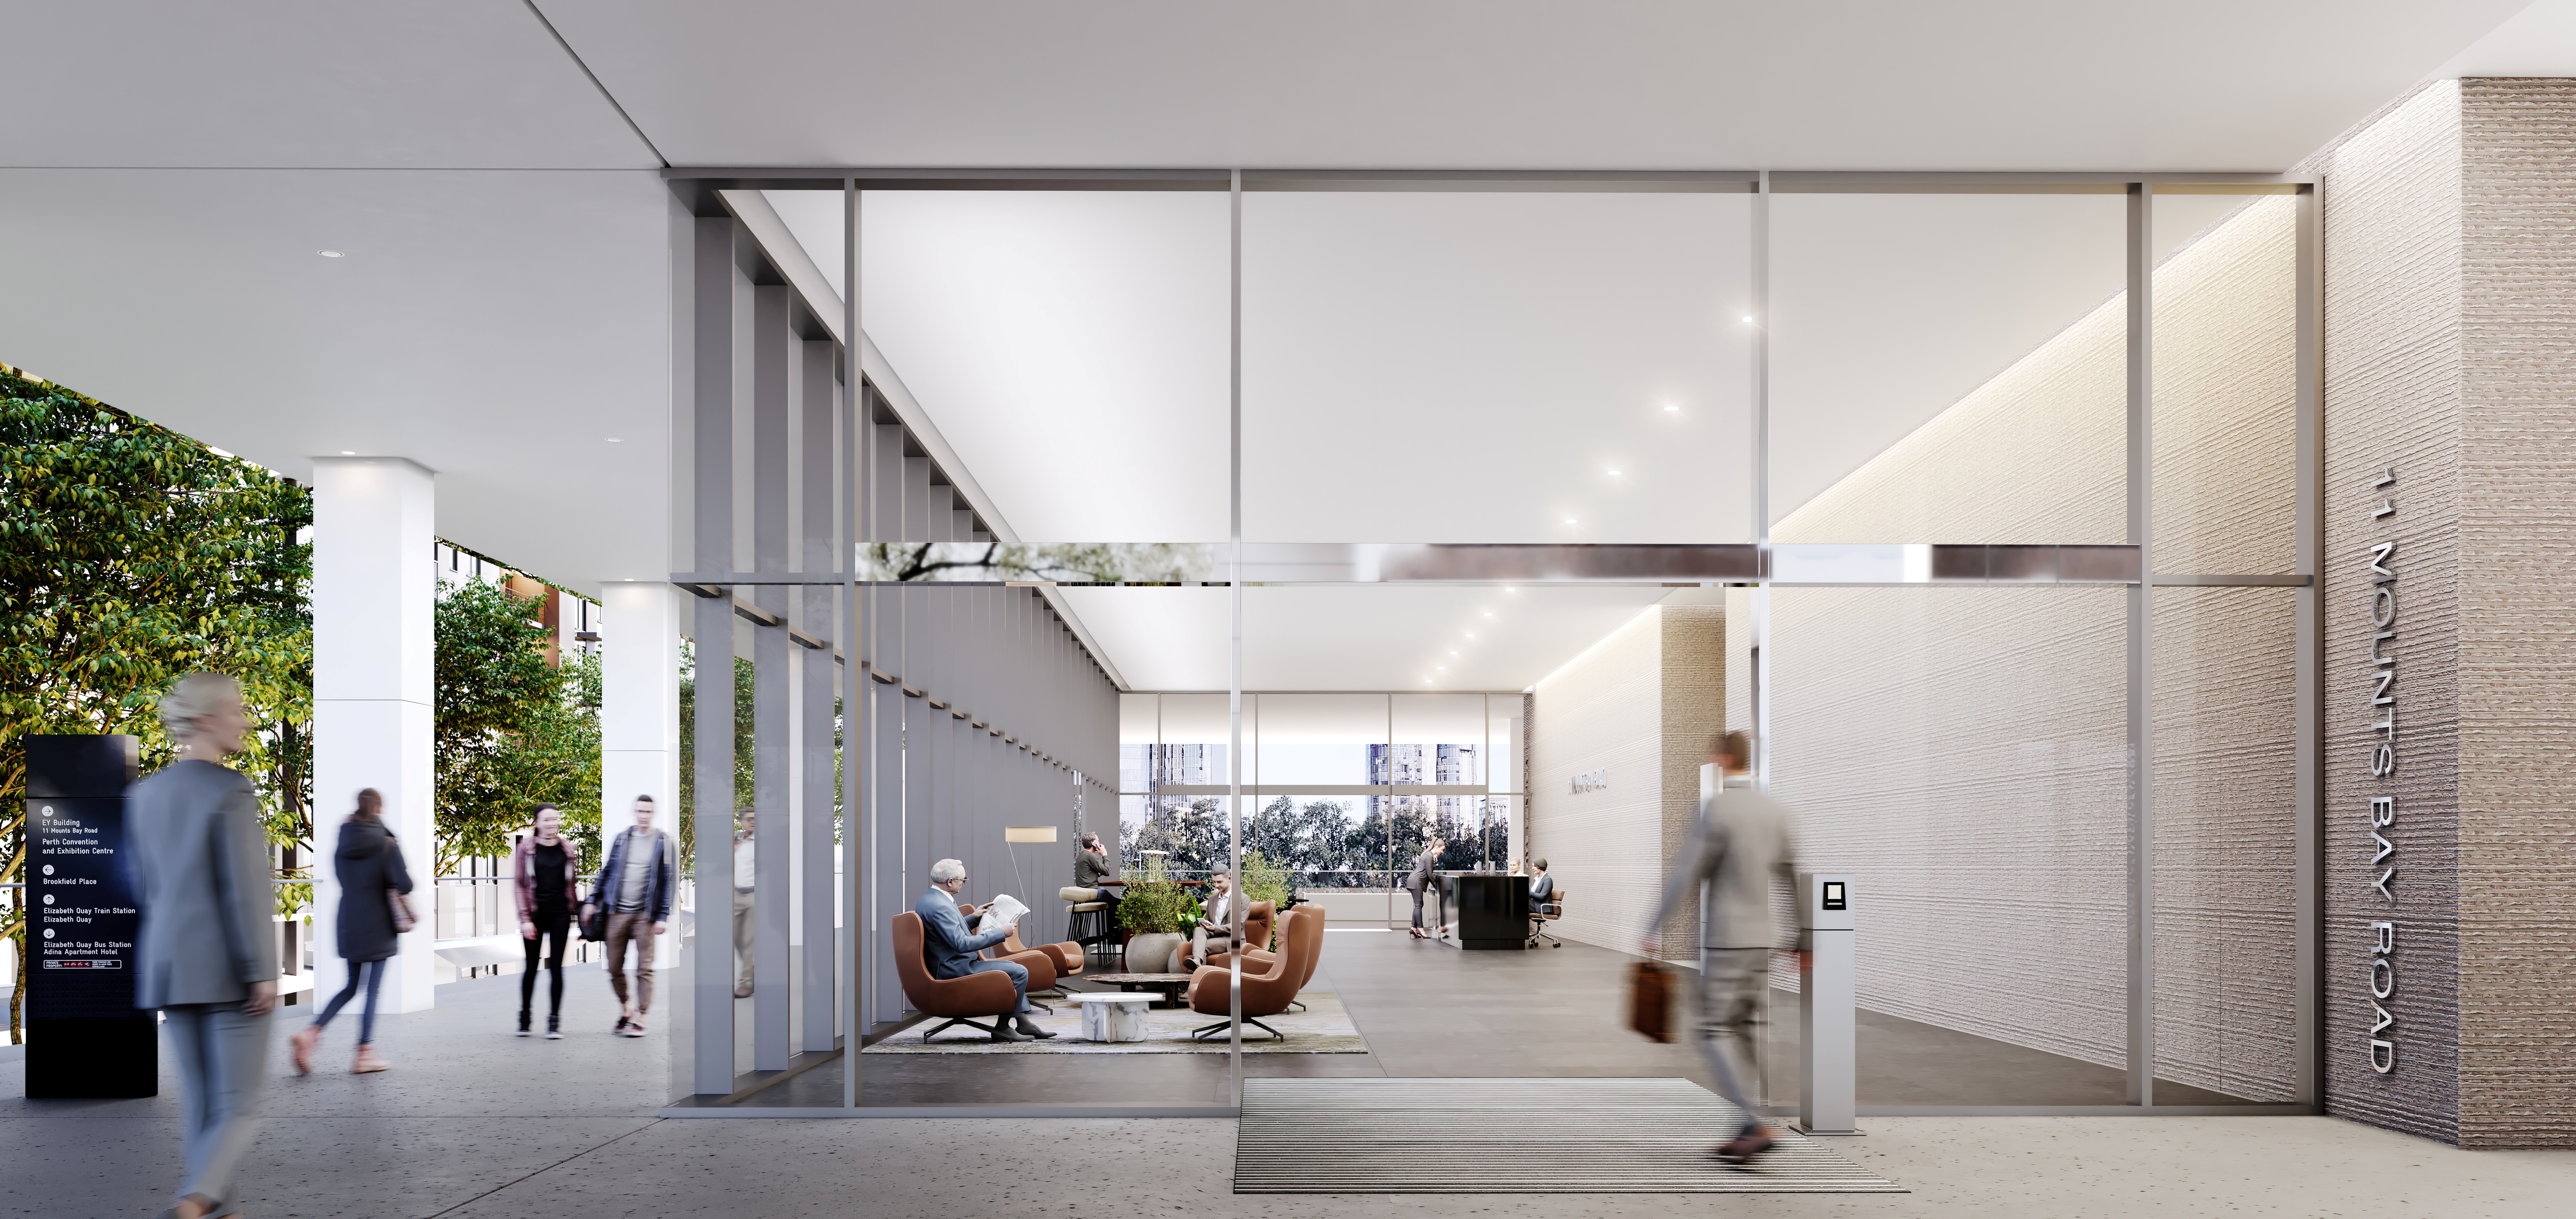 11 Mounts Bay entrance and lobby with floor to ceiling windows